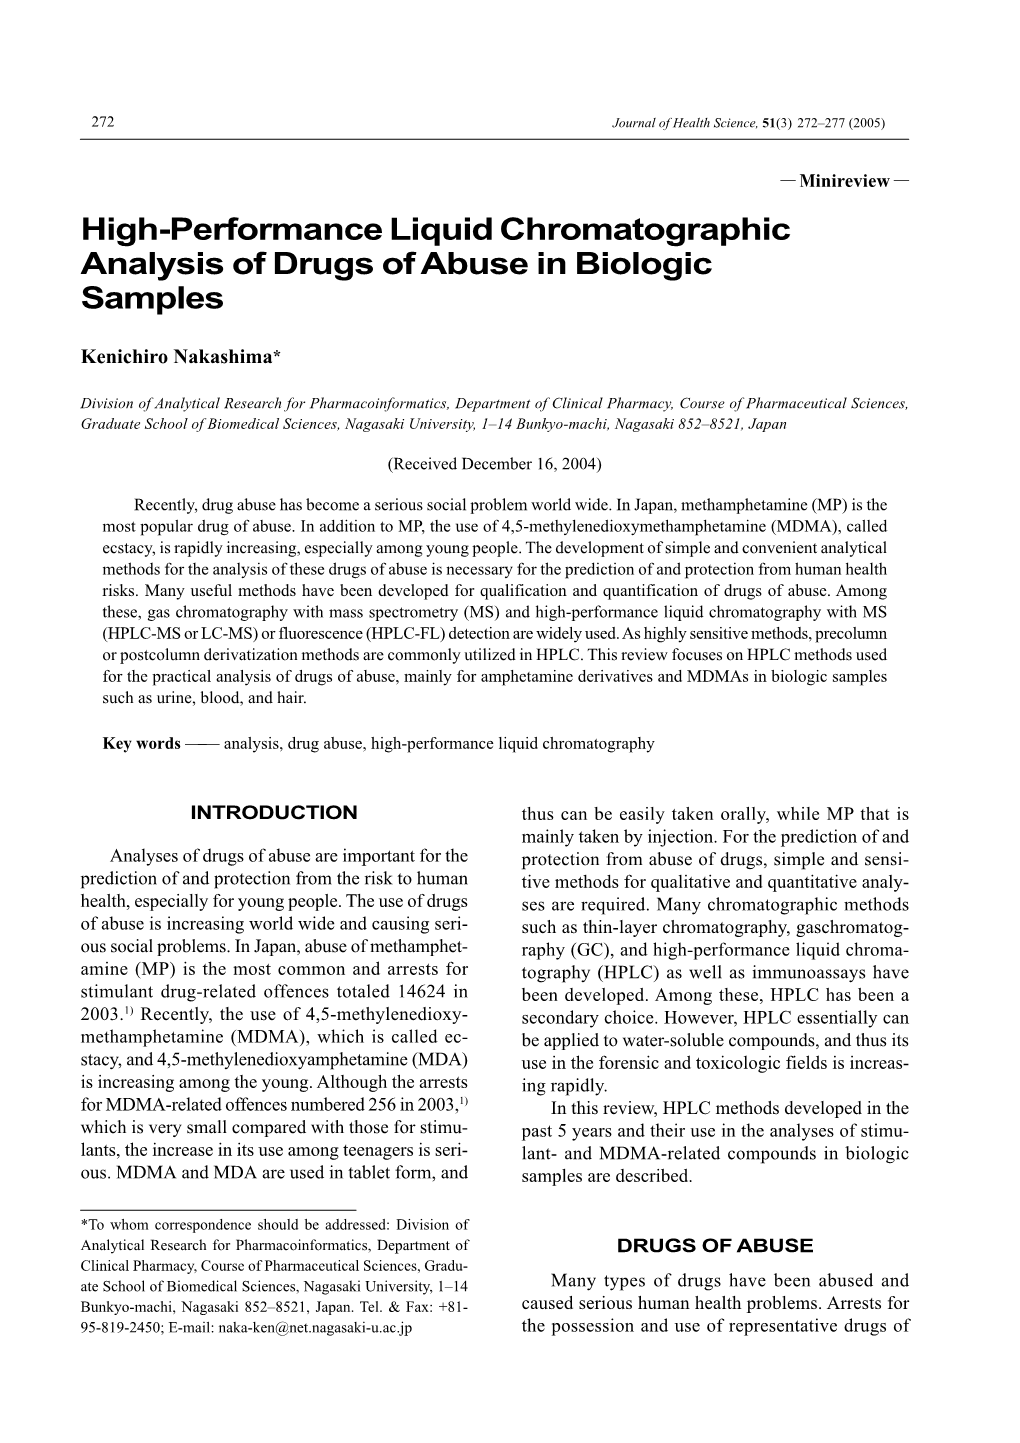 High-Performance Liquid Chromatographic Analysis of Drugs of Abuse in Biologic Samples